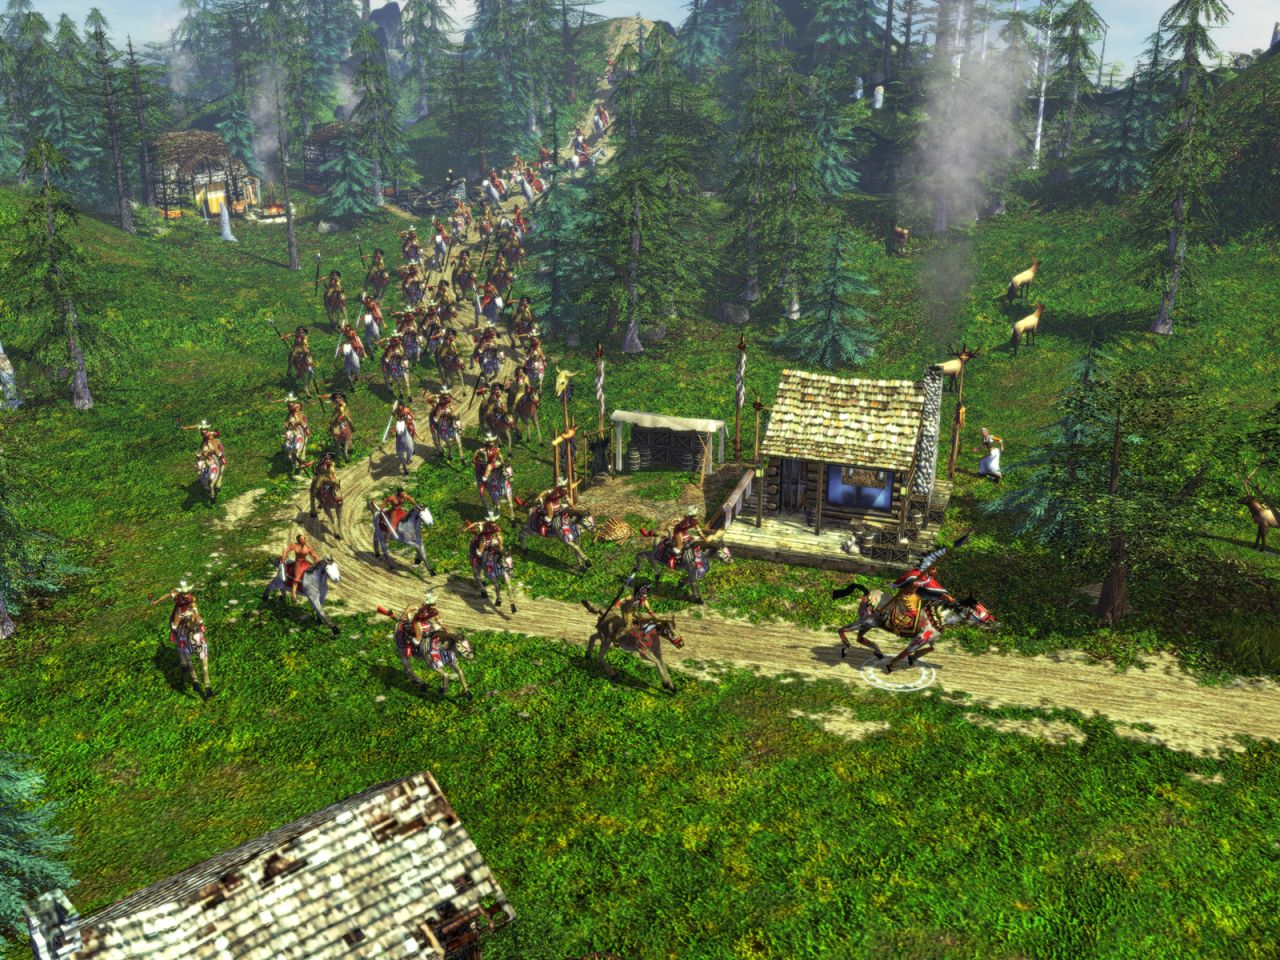 Age Of Empires III Picture